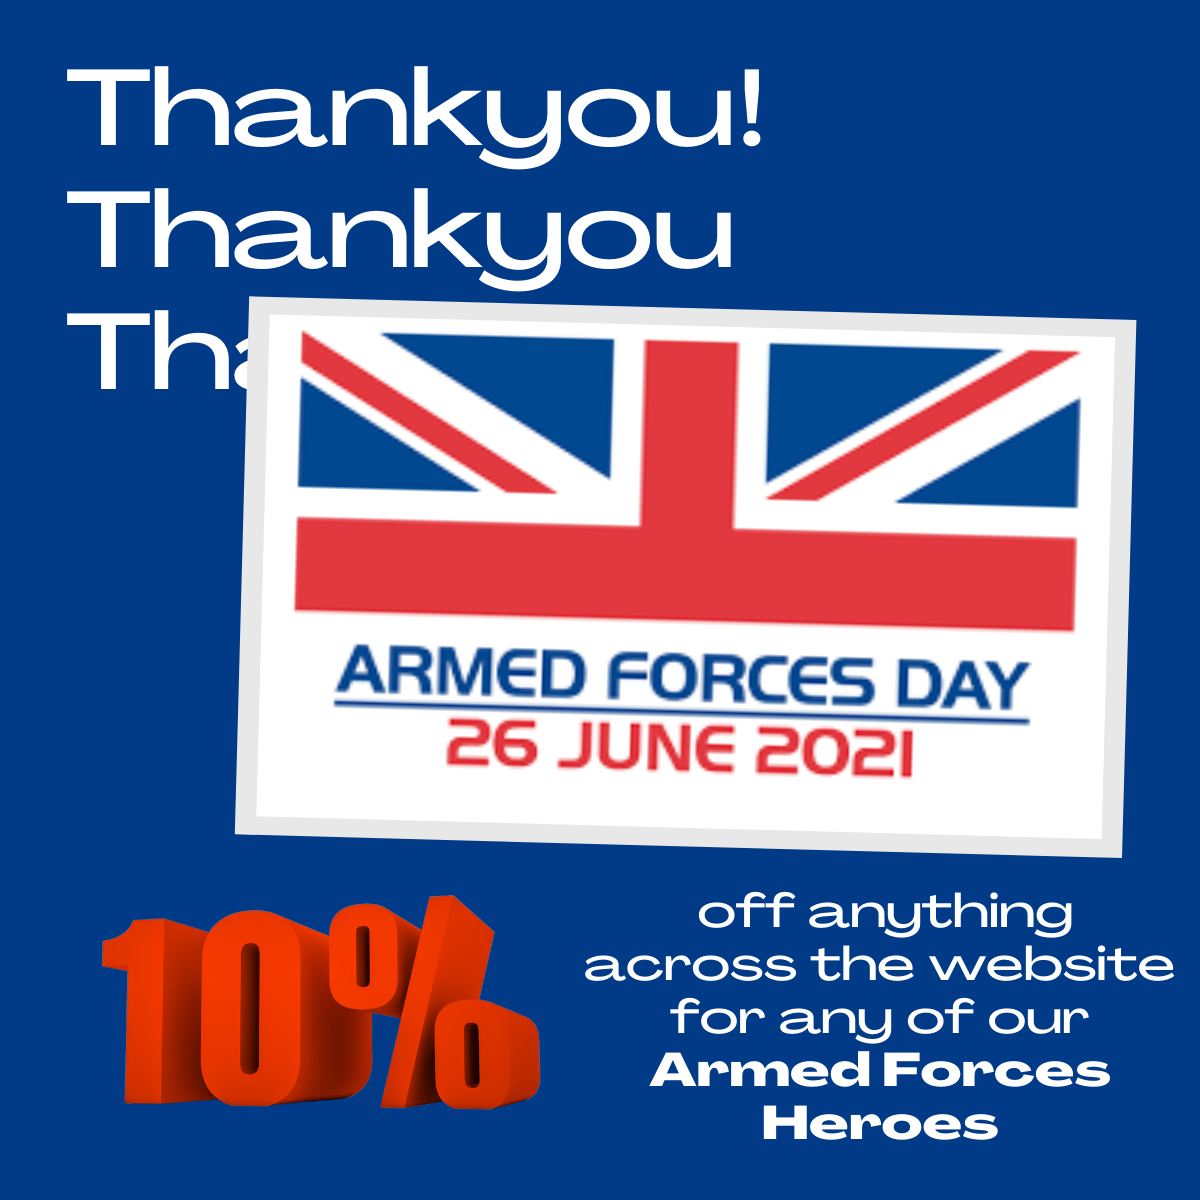 Thankyou to our Armed Forces Heroes!